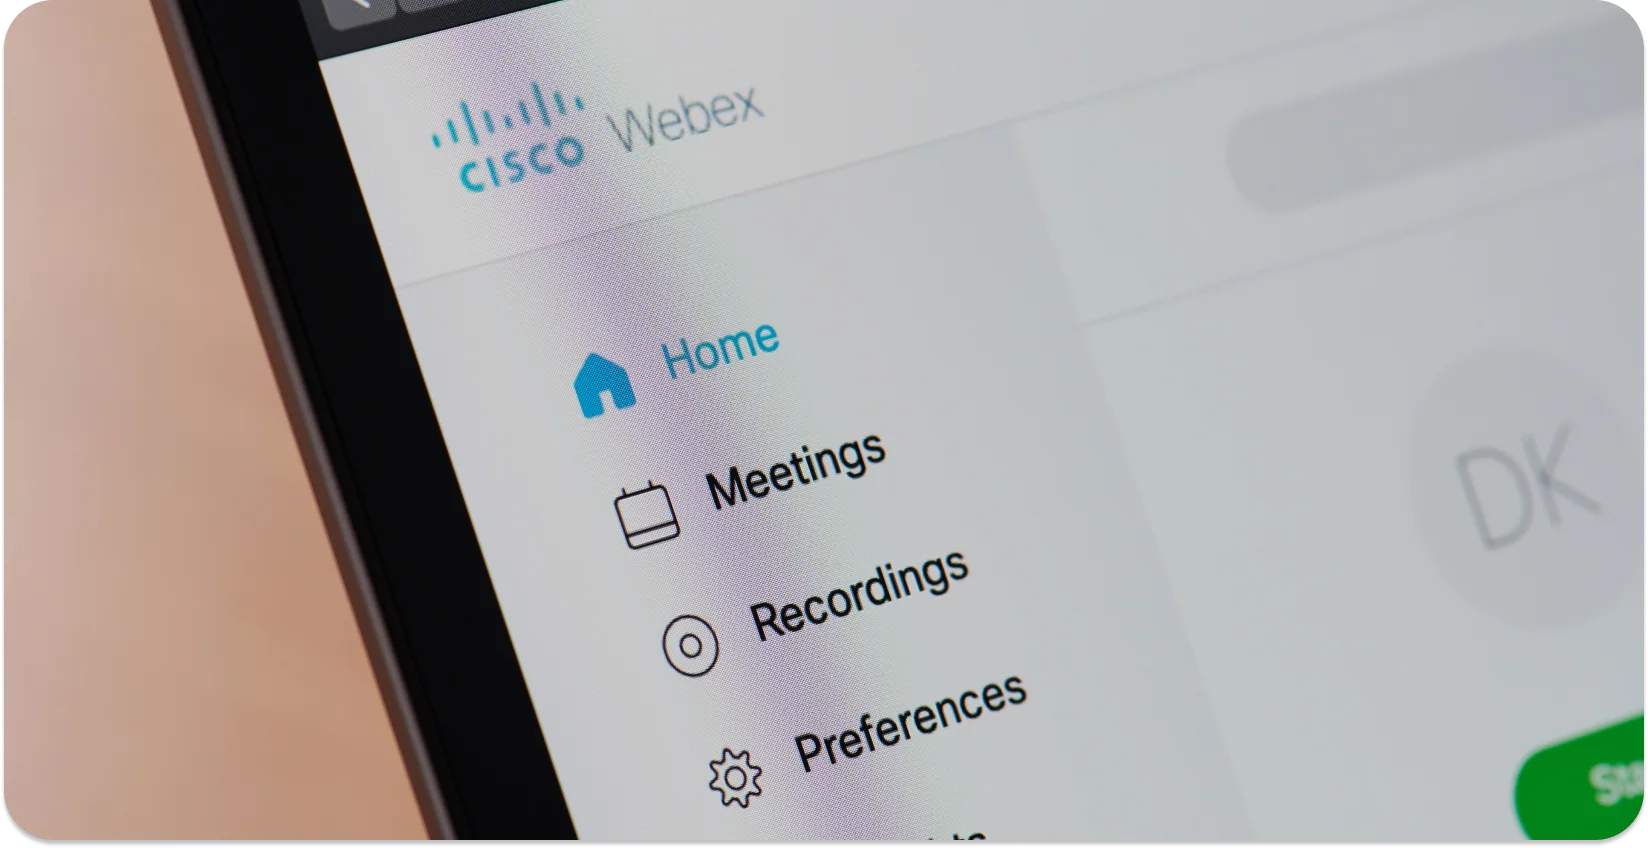 Record Webex meeting options displayed on a smartphone screen.